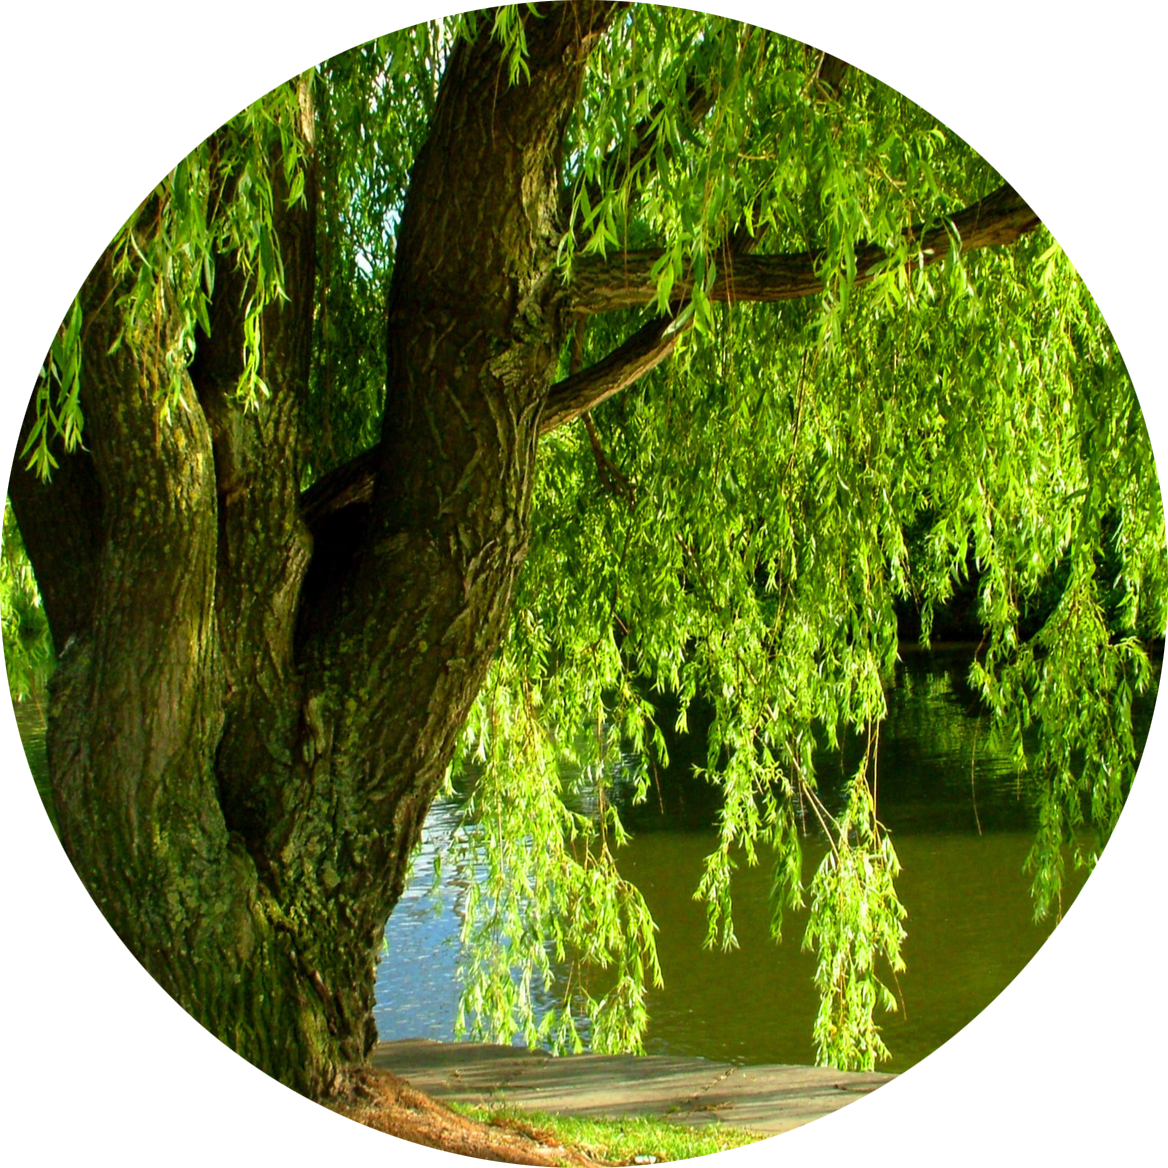 Willow tree by the river